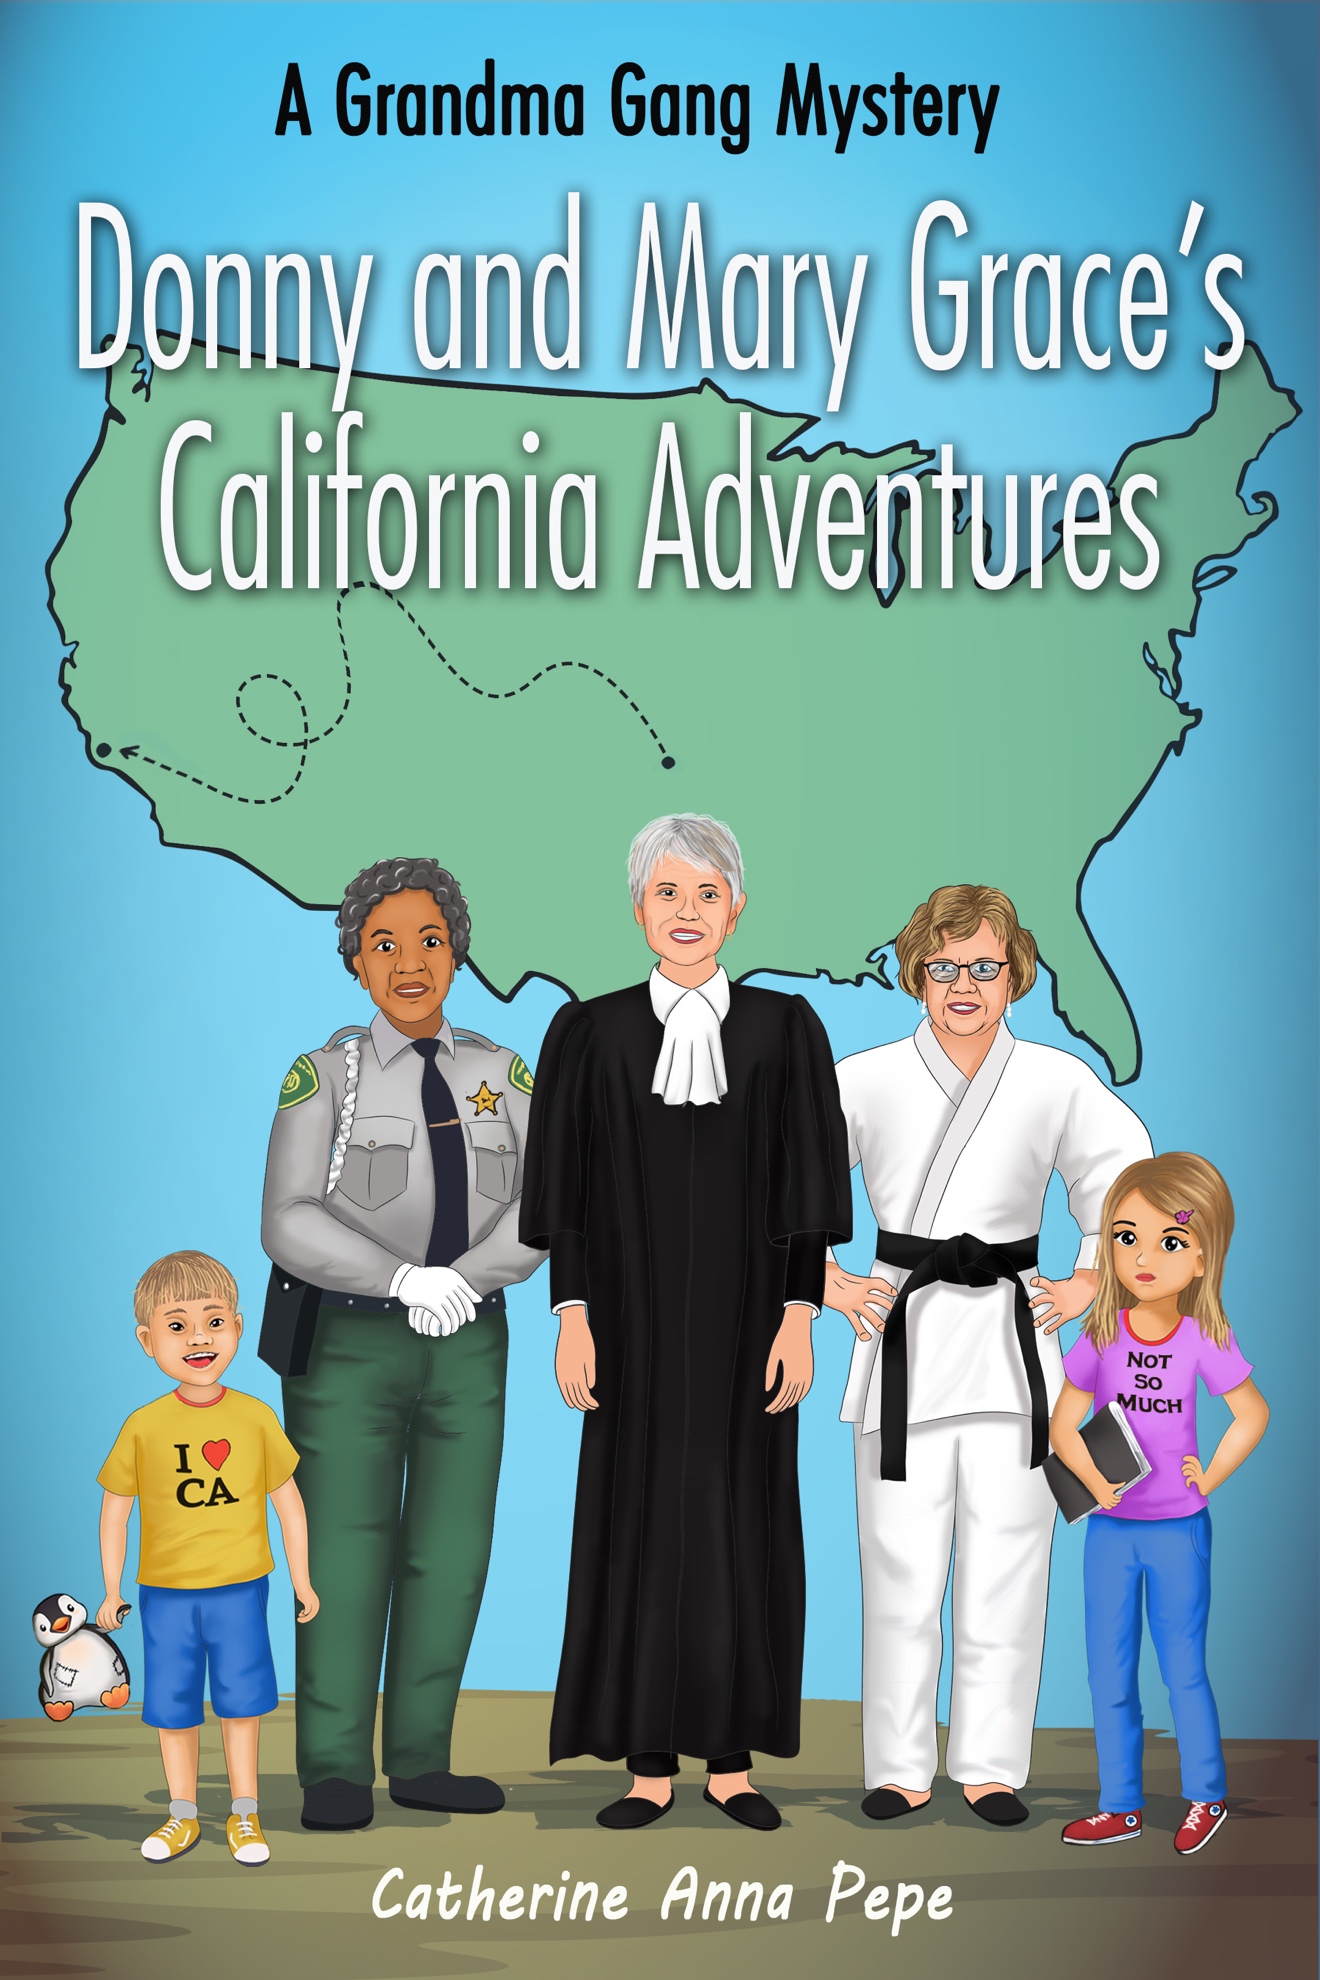 OnlineBookClub Founder Scott Hughes, Awards Donny and Mary Grace's California Adventure as Book of the Month for May 2023